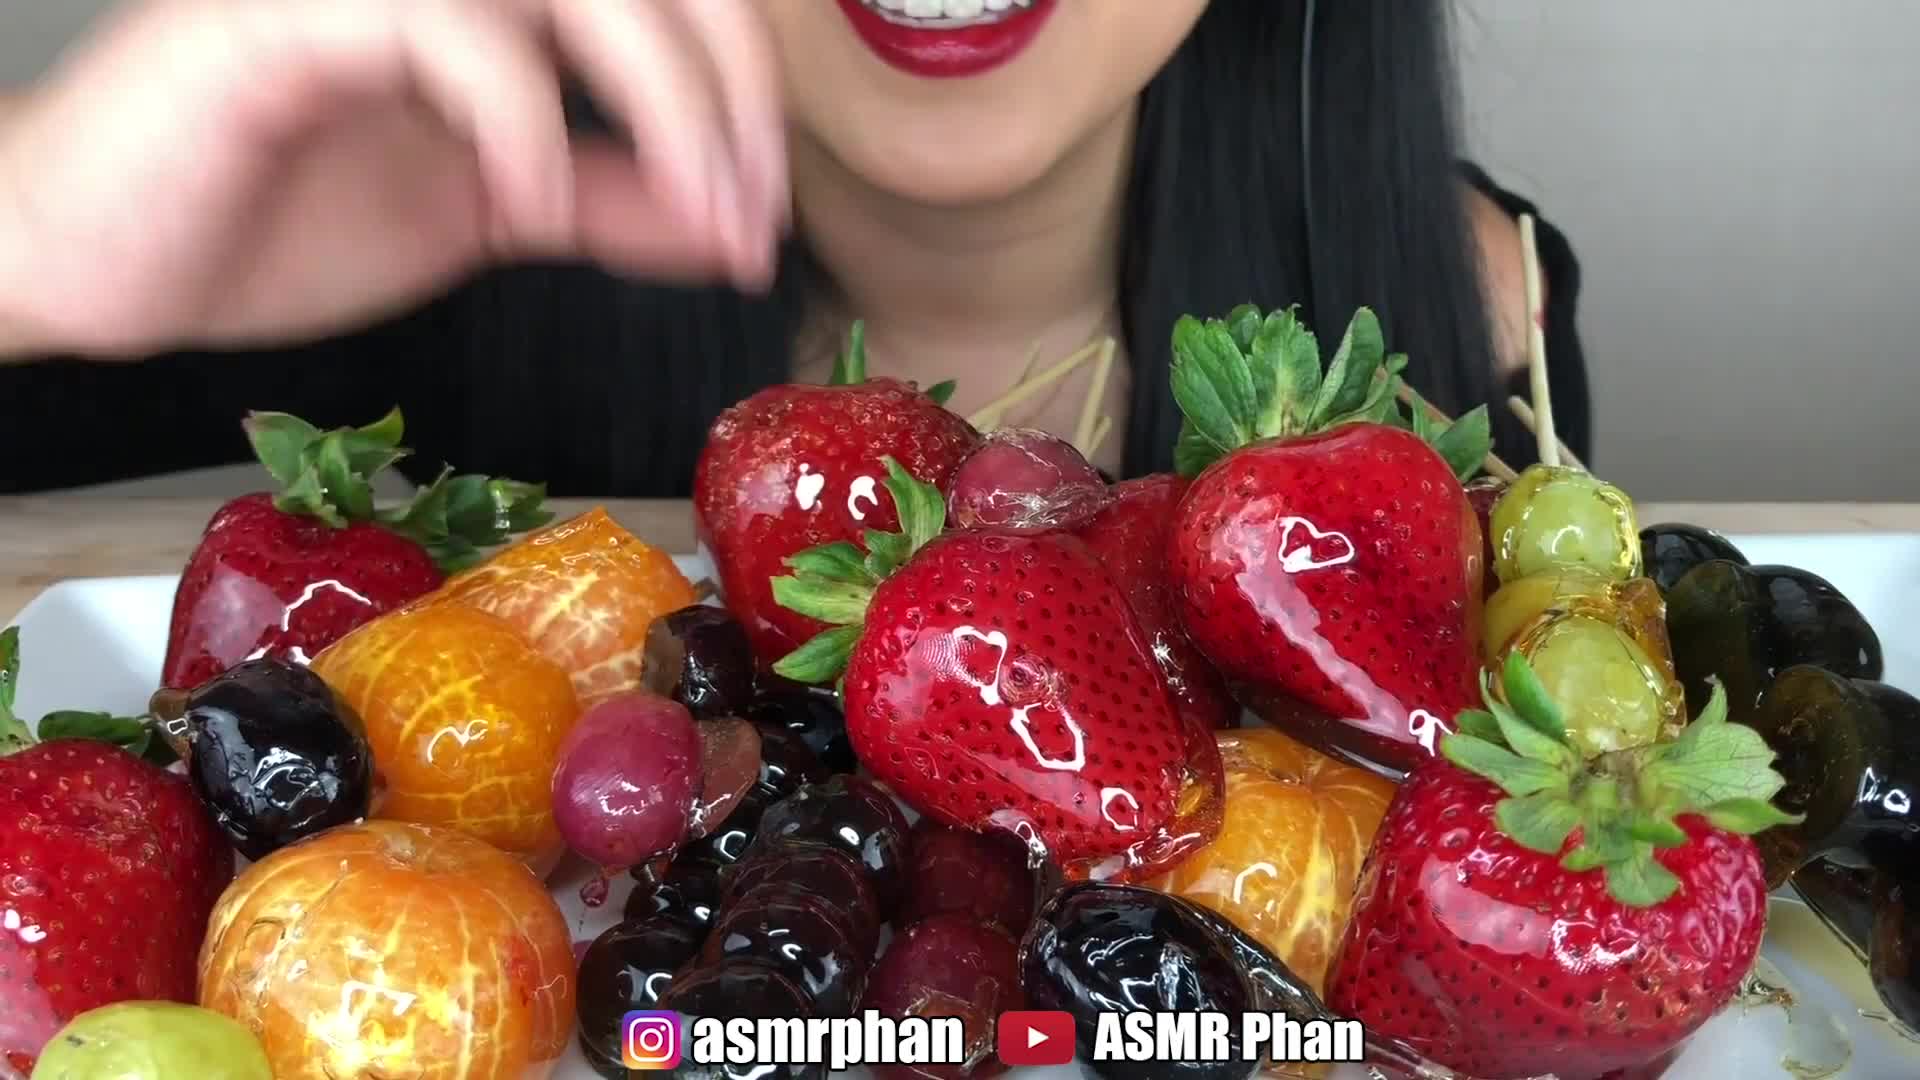 [Good Food Sounds] Ice Cracking Eating Sounds [1080P] Sugar W ~( `u) - ASMR CANDIED FRUITS - Tanghulu -(Ice Cracking Eating Sounds)